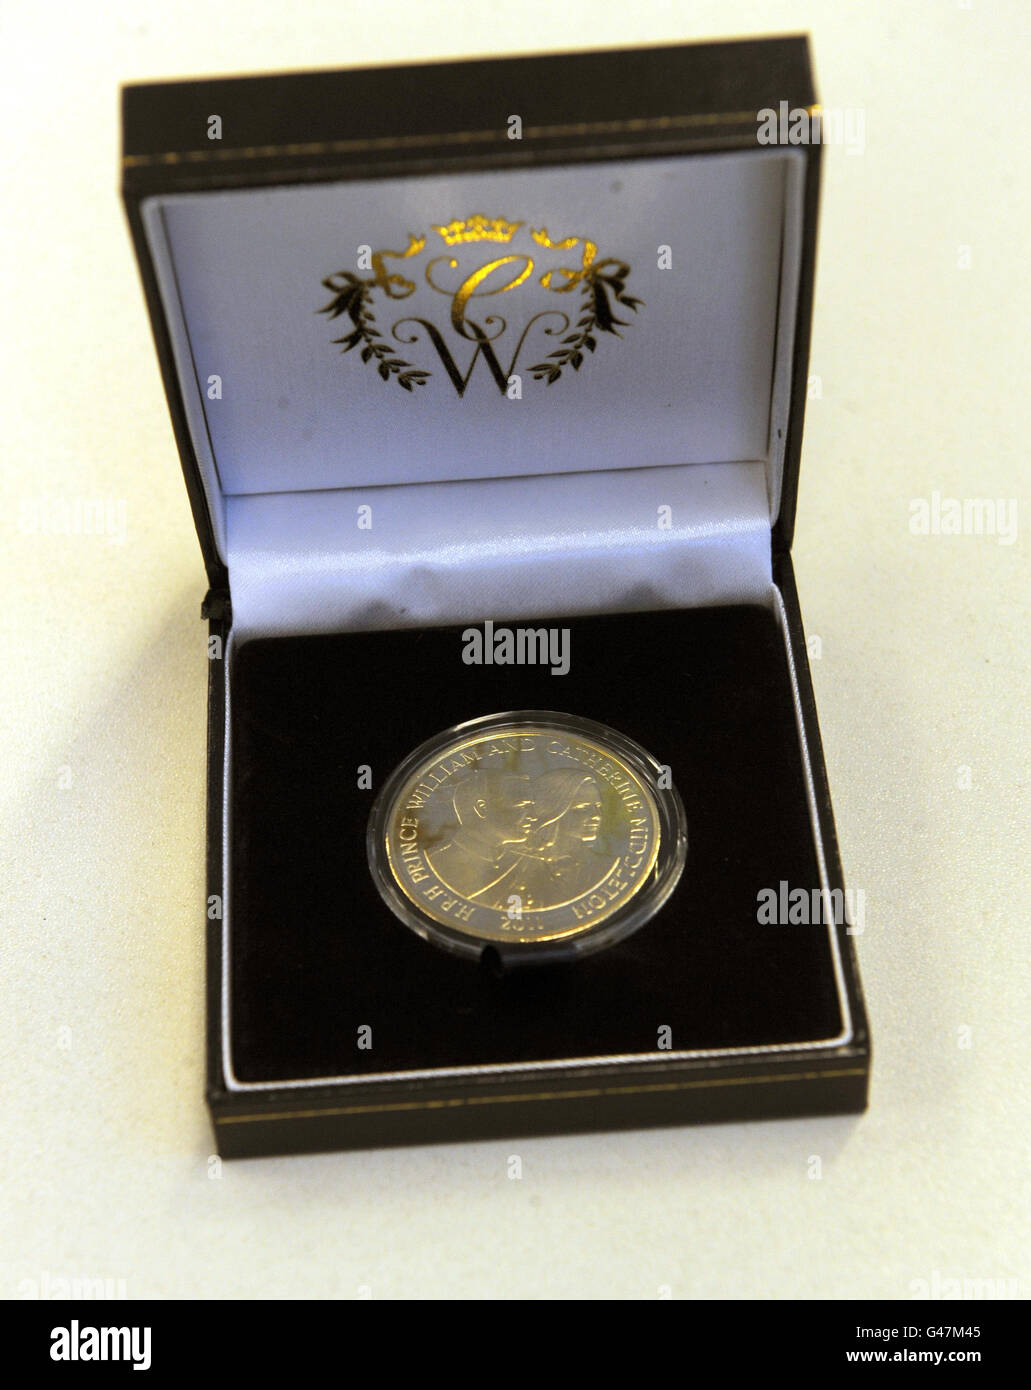 A souvenir Royal Wedding coin from the Royal Collection purchased from Buckingham Palace gift shop, London Stock Photo